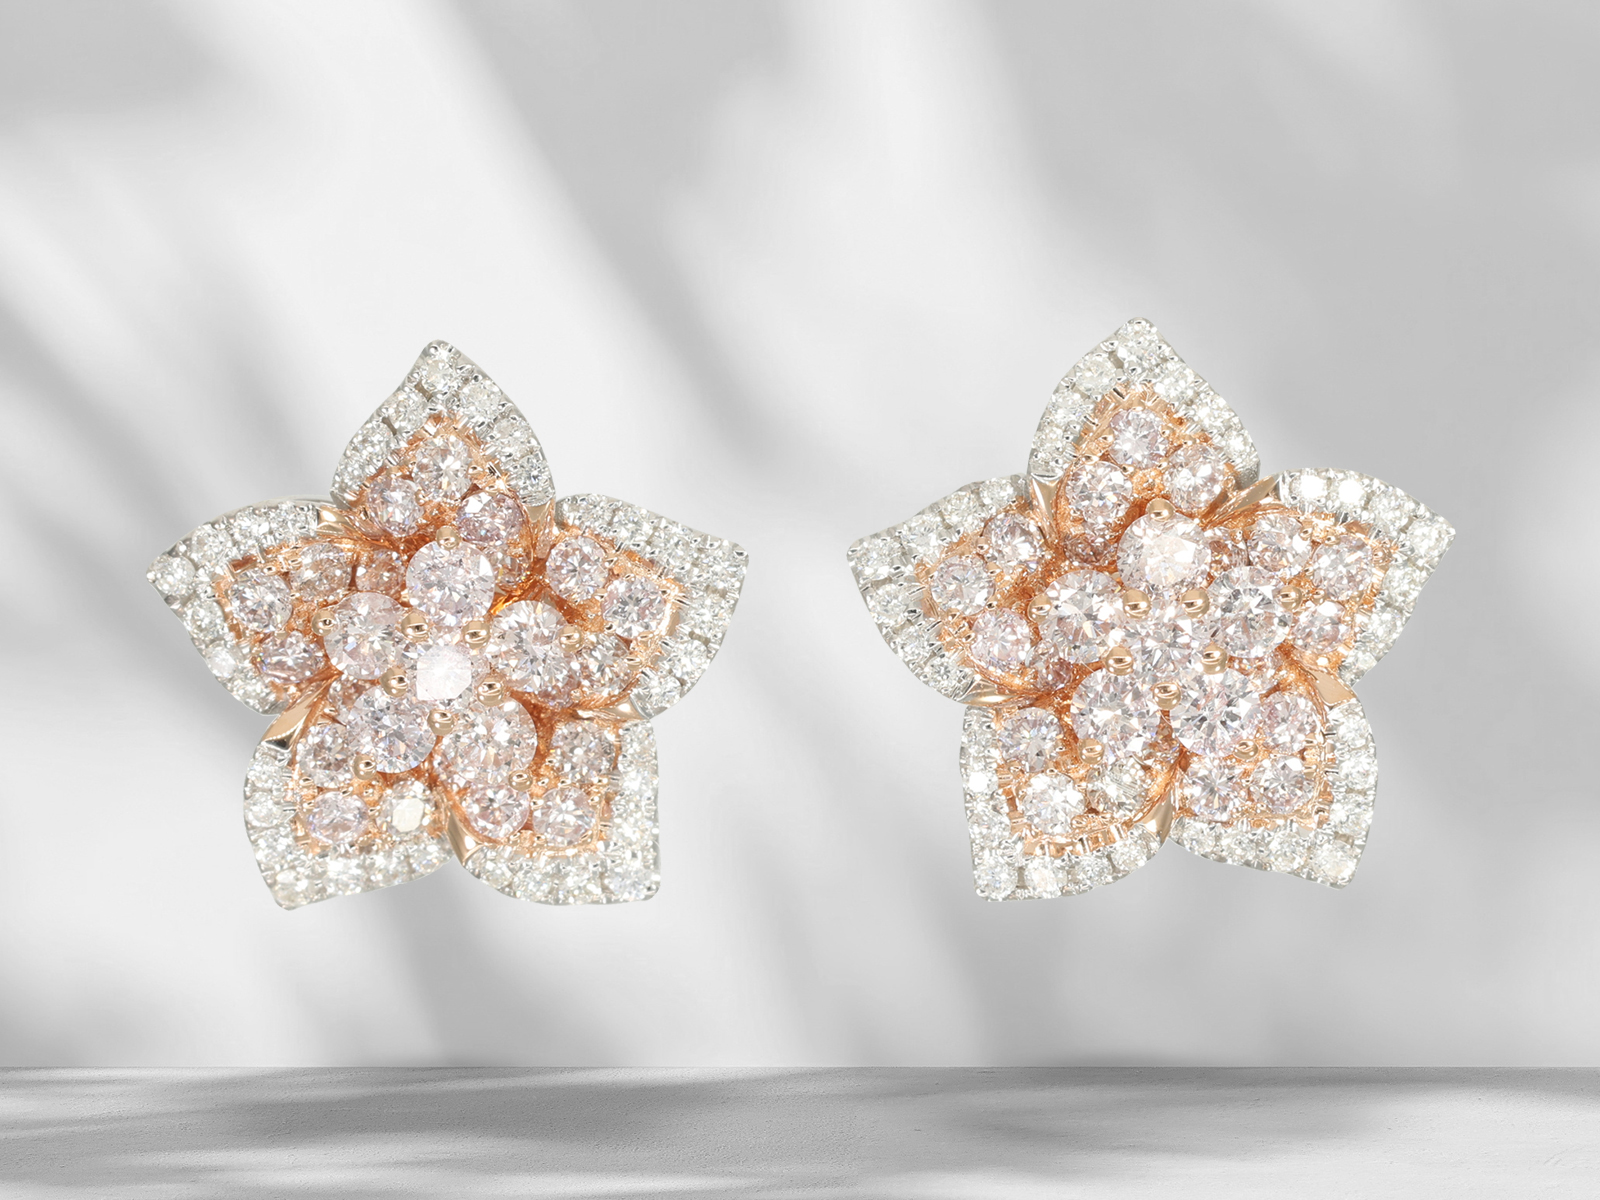 Earrings: modern diamond flower stud earrings with pink and white brilliant-cut diamonds, like new - Image 6 of 6